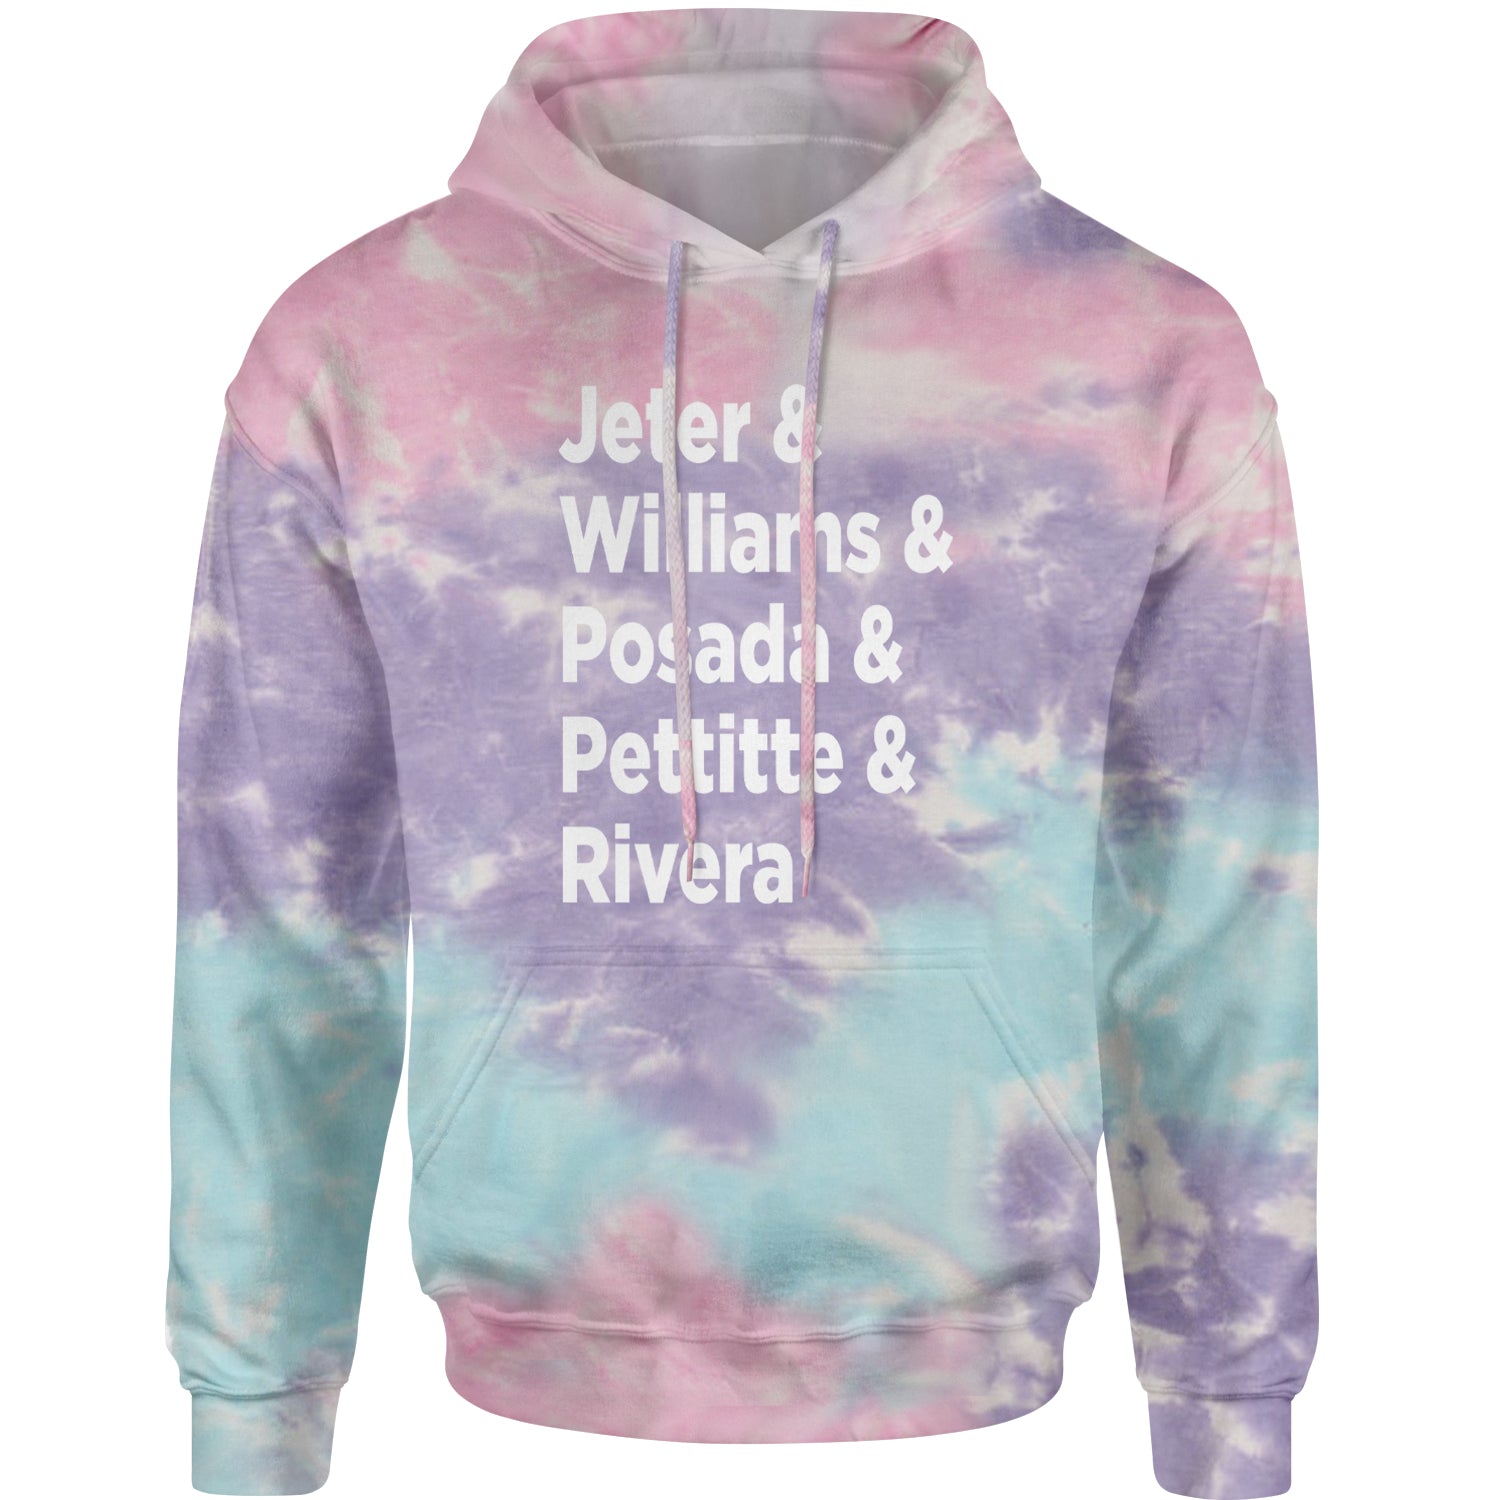 Jeter and Williams and Posada and Pettitte and Rivera Adult Hoodie Sweatshirt baseball, comes, here, judge, the by Expression Tees